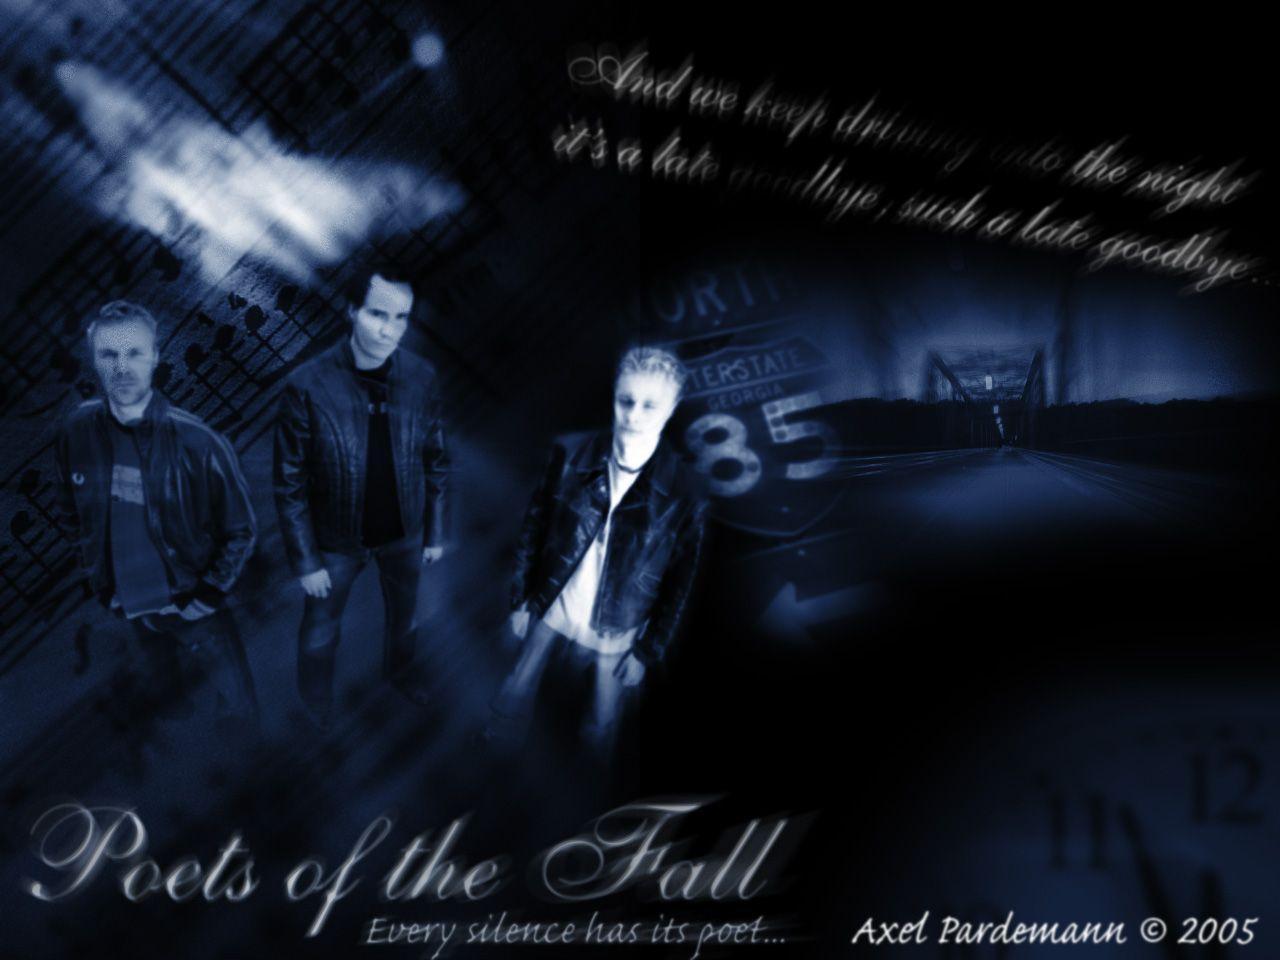 Poets of the fall carnival of rust караоке фото 85